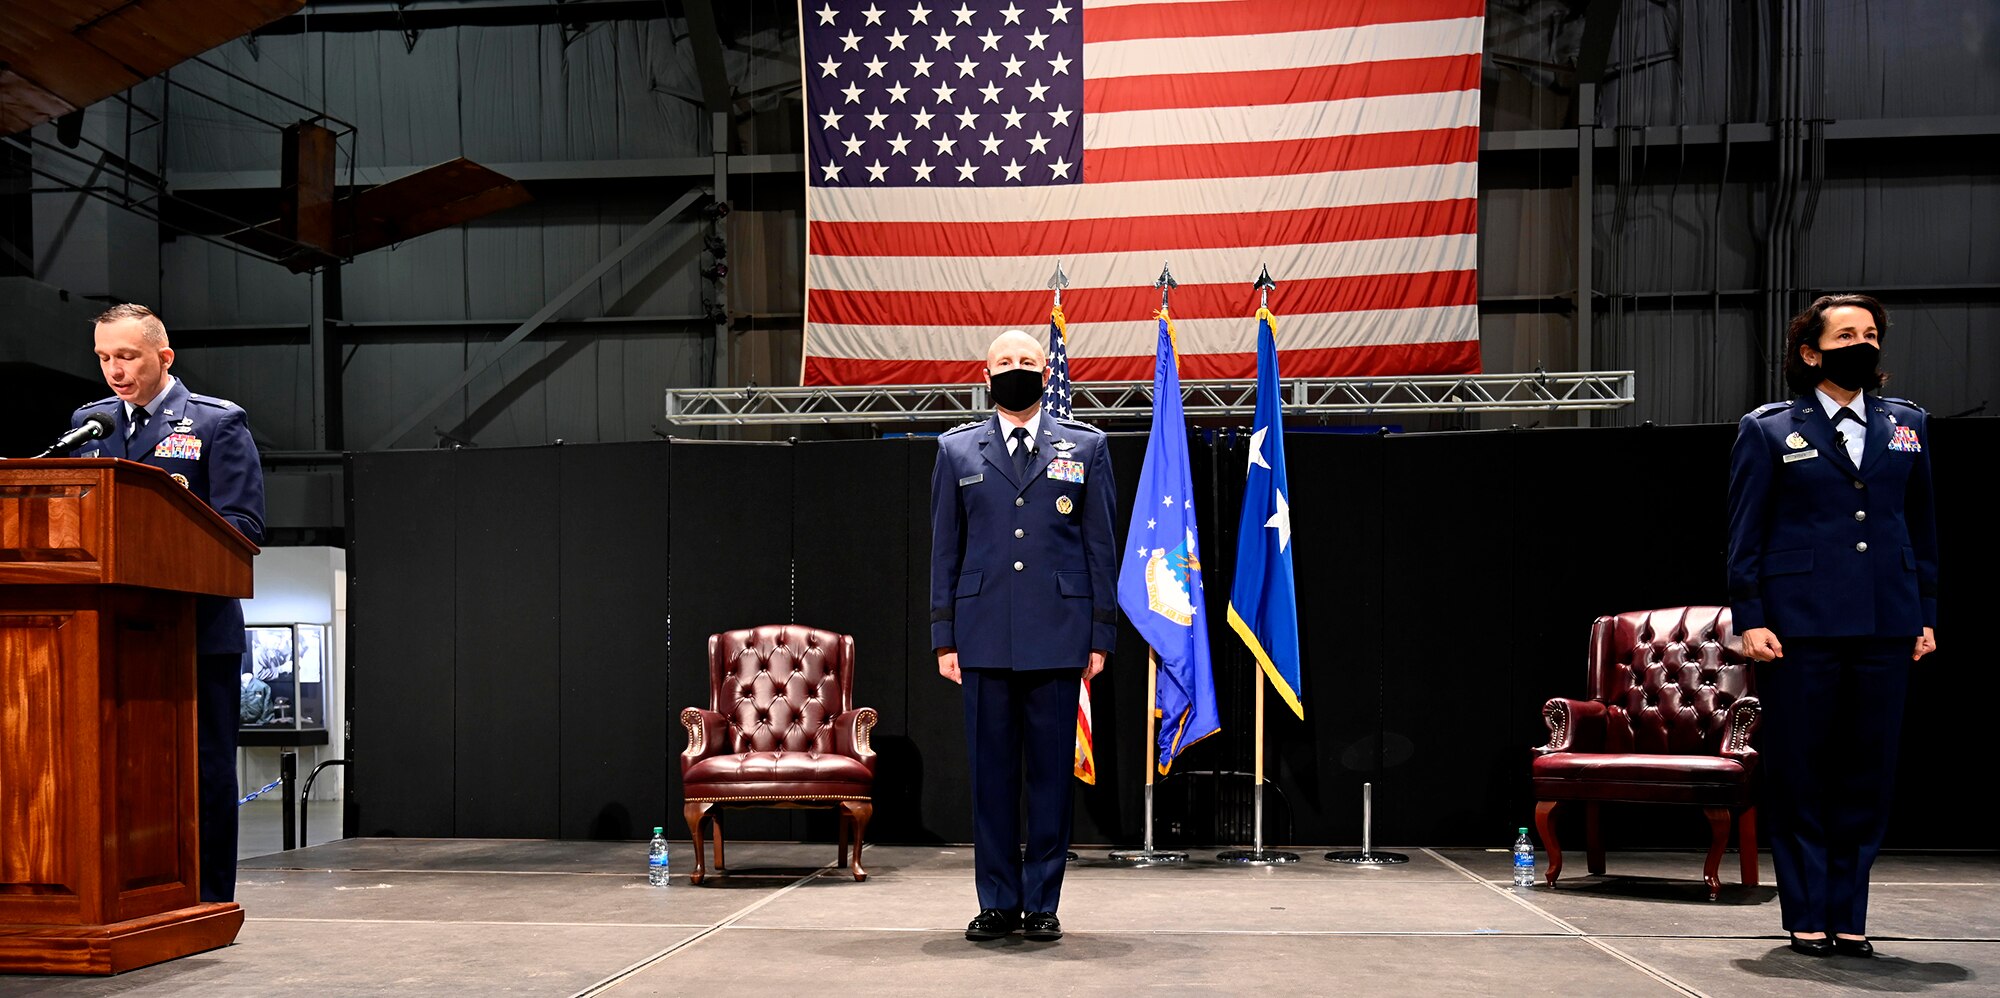 Col. Lyle Drew announces the general officer promotion as Lt. Gen Carl Schaefer and Col. Jeannine Ryder stand at attention Aug. 3 at the National Museum of the United States Air Force, Wright-Patterson Air Force Base, Ohio. (photo by Darrius Parker)